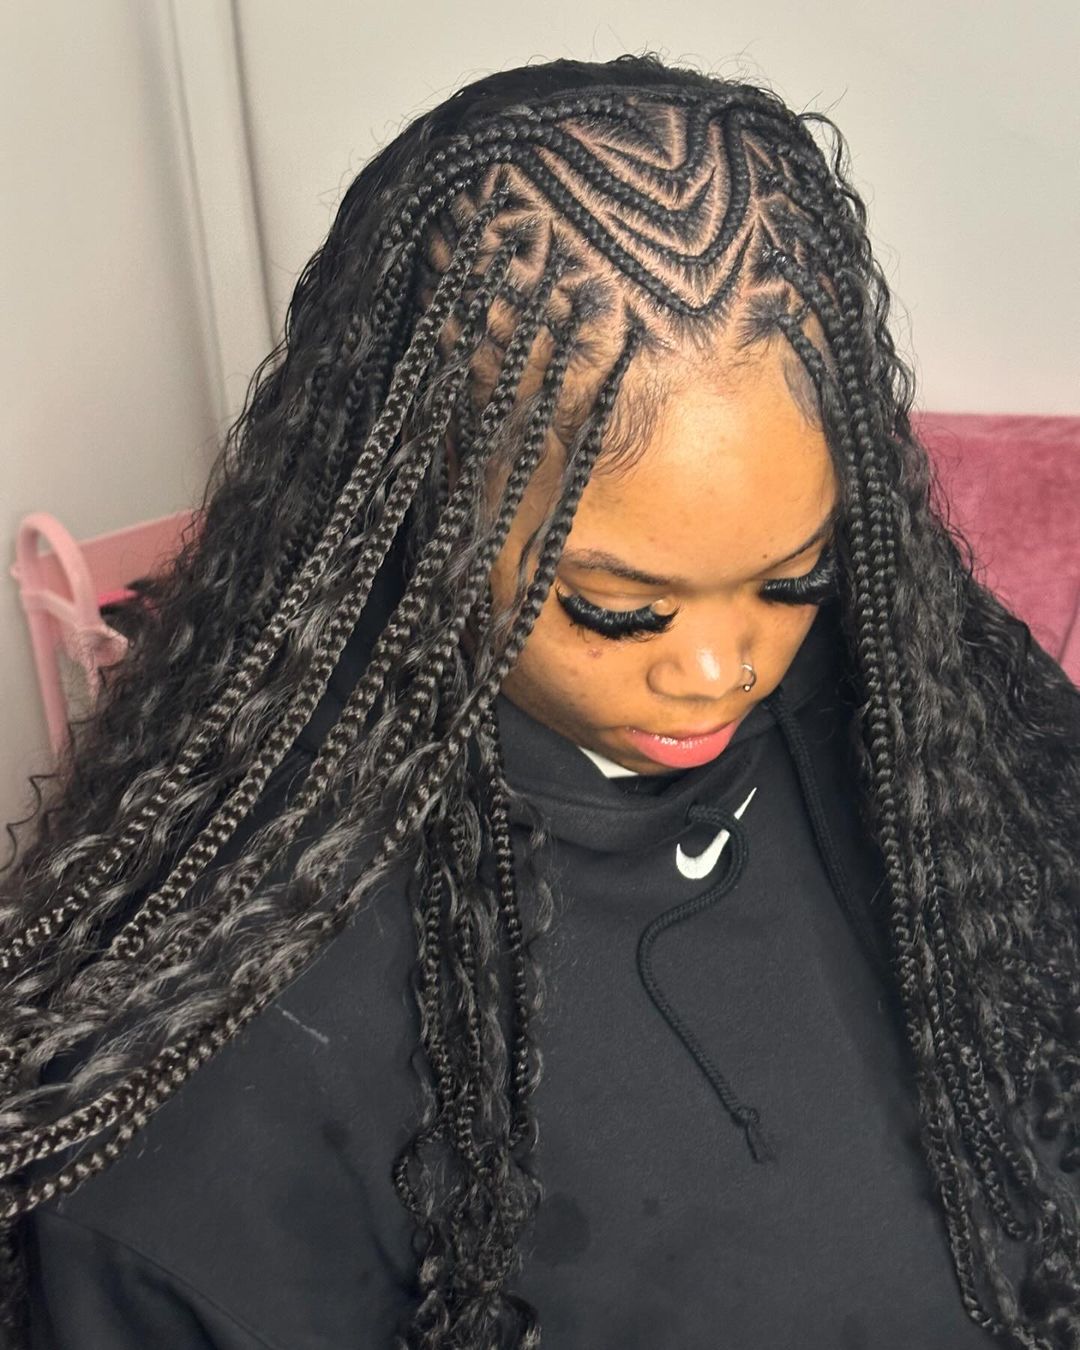 flip over Fulani braids with curly weave